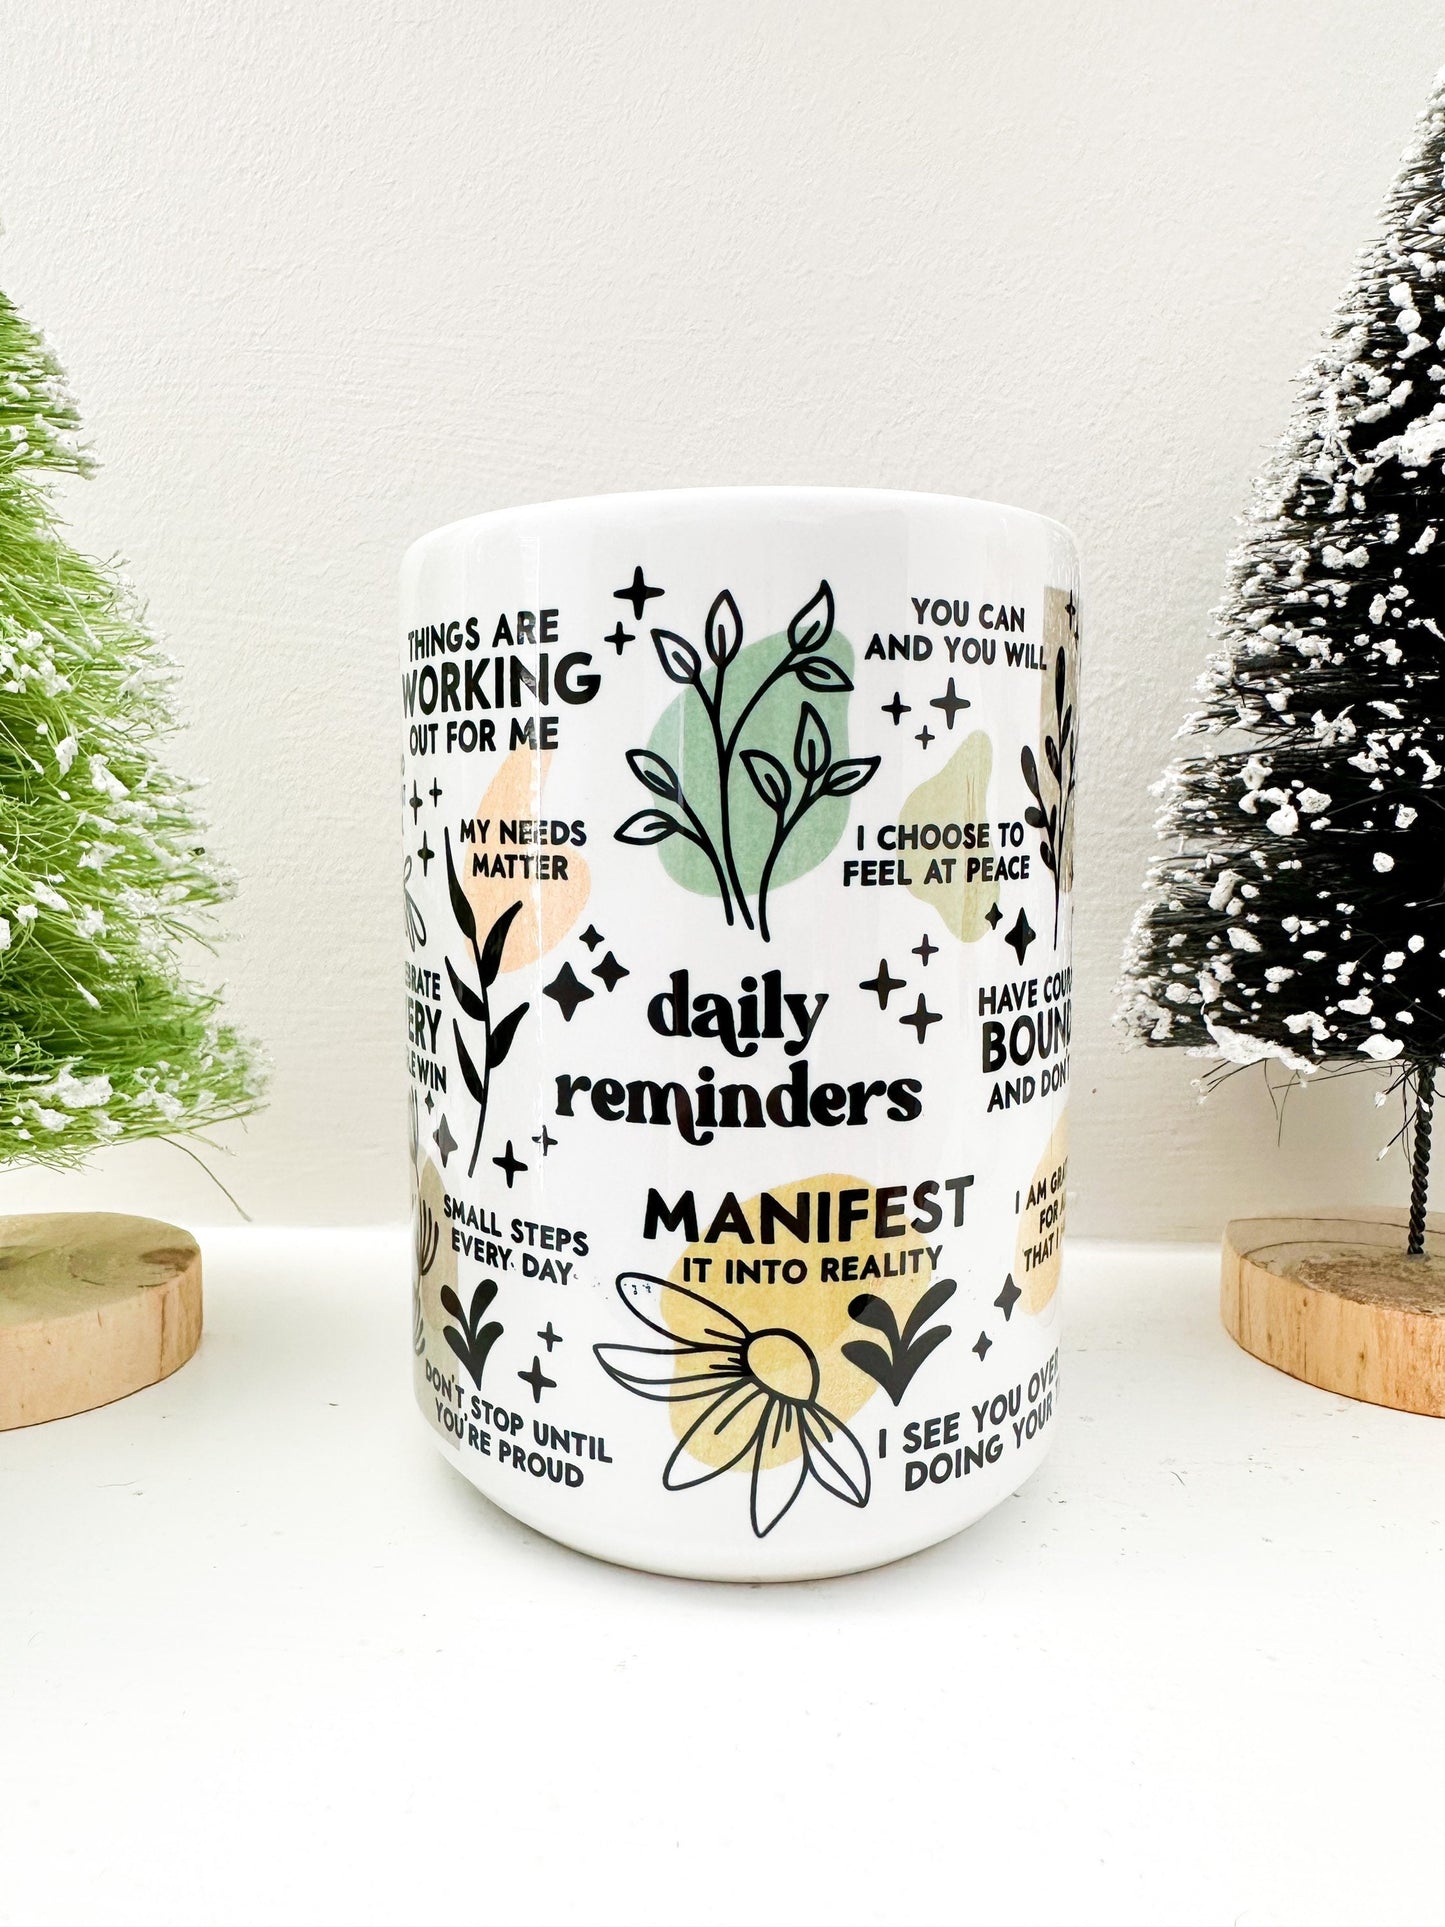 Clean Daily Affirmations Mug, Coffee Mug, Coffee Cup, Daily Mantra Cup, Cup of Motivation, Daily Motivation, Daily Reminders